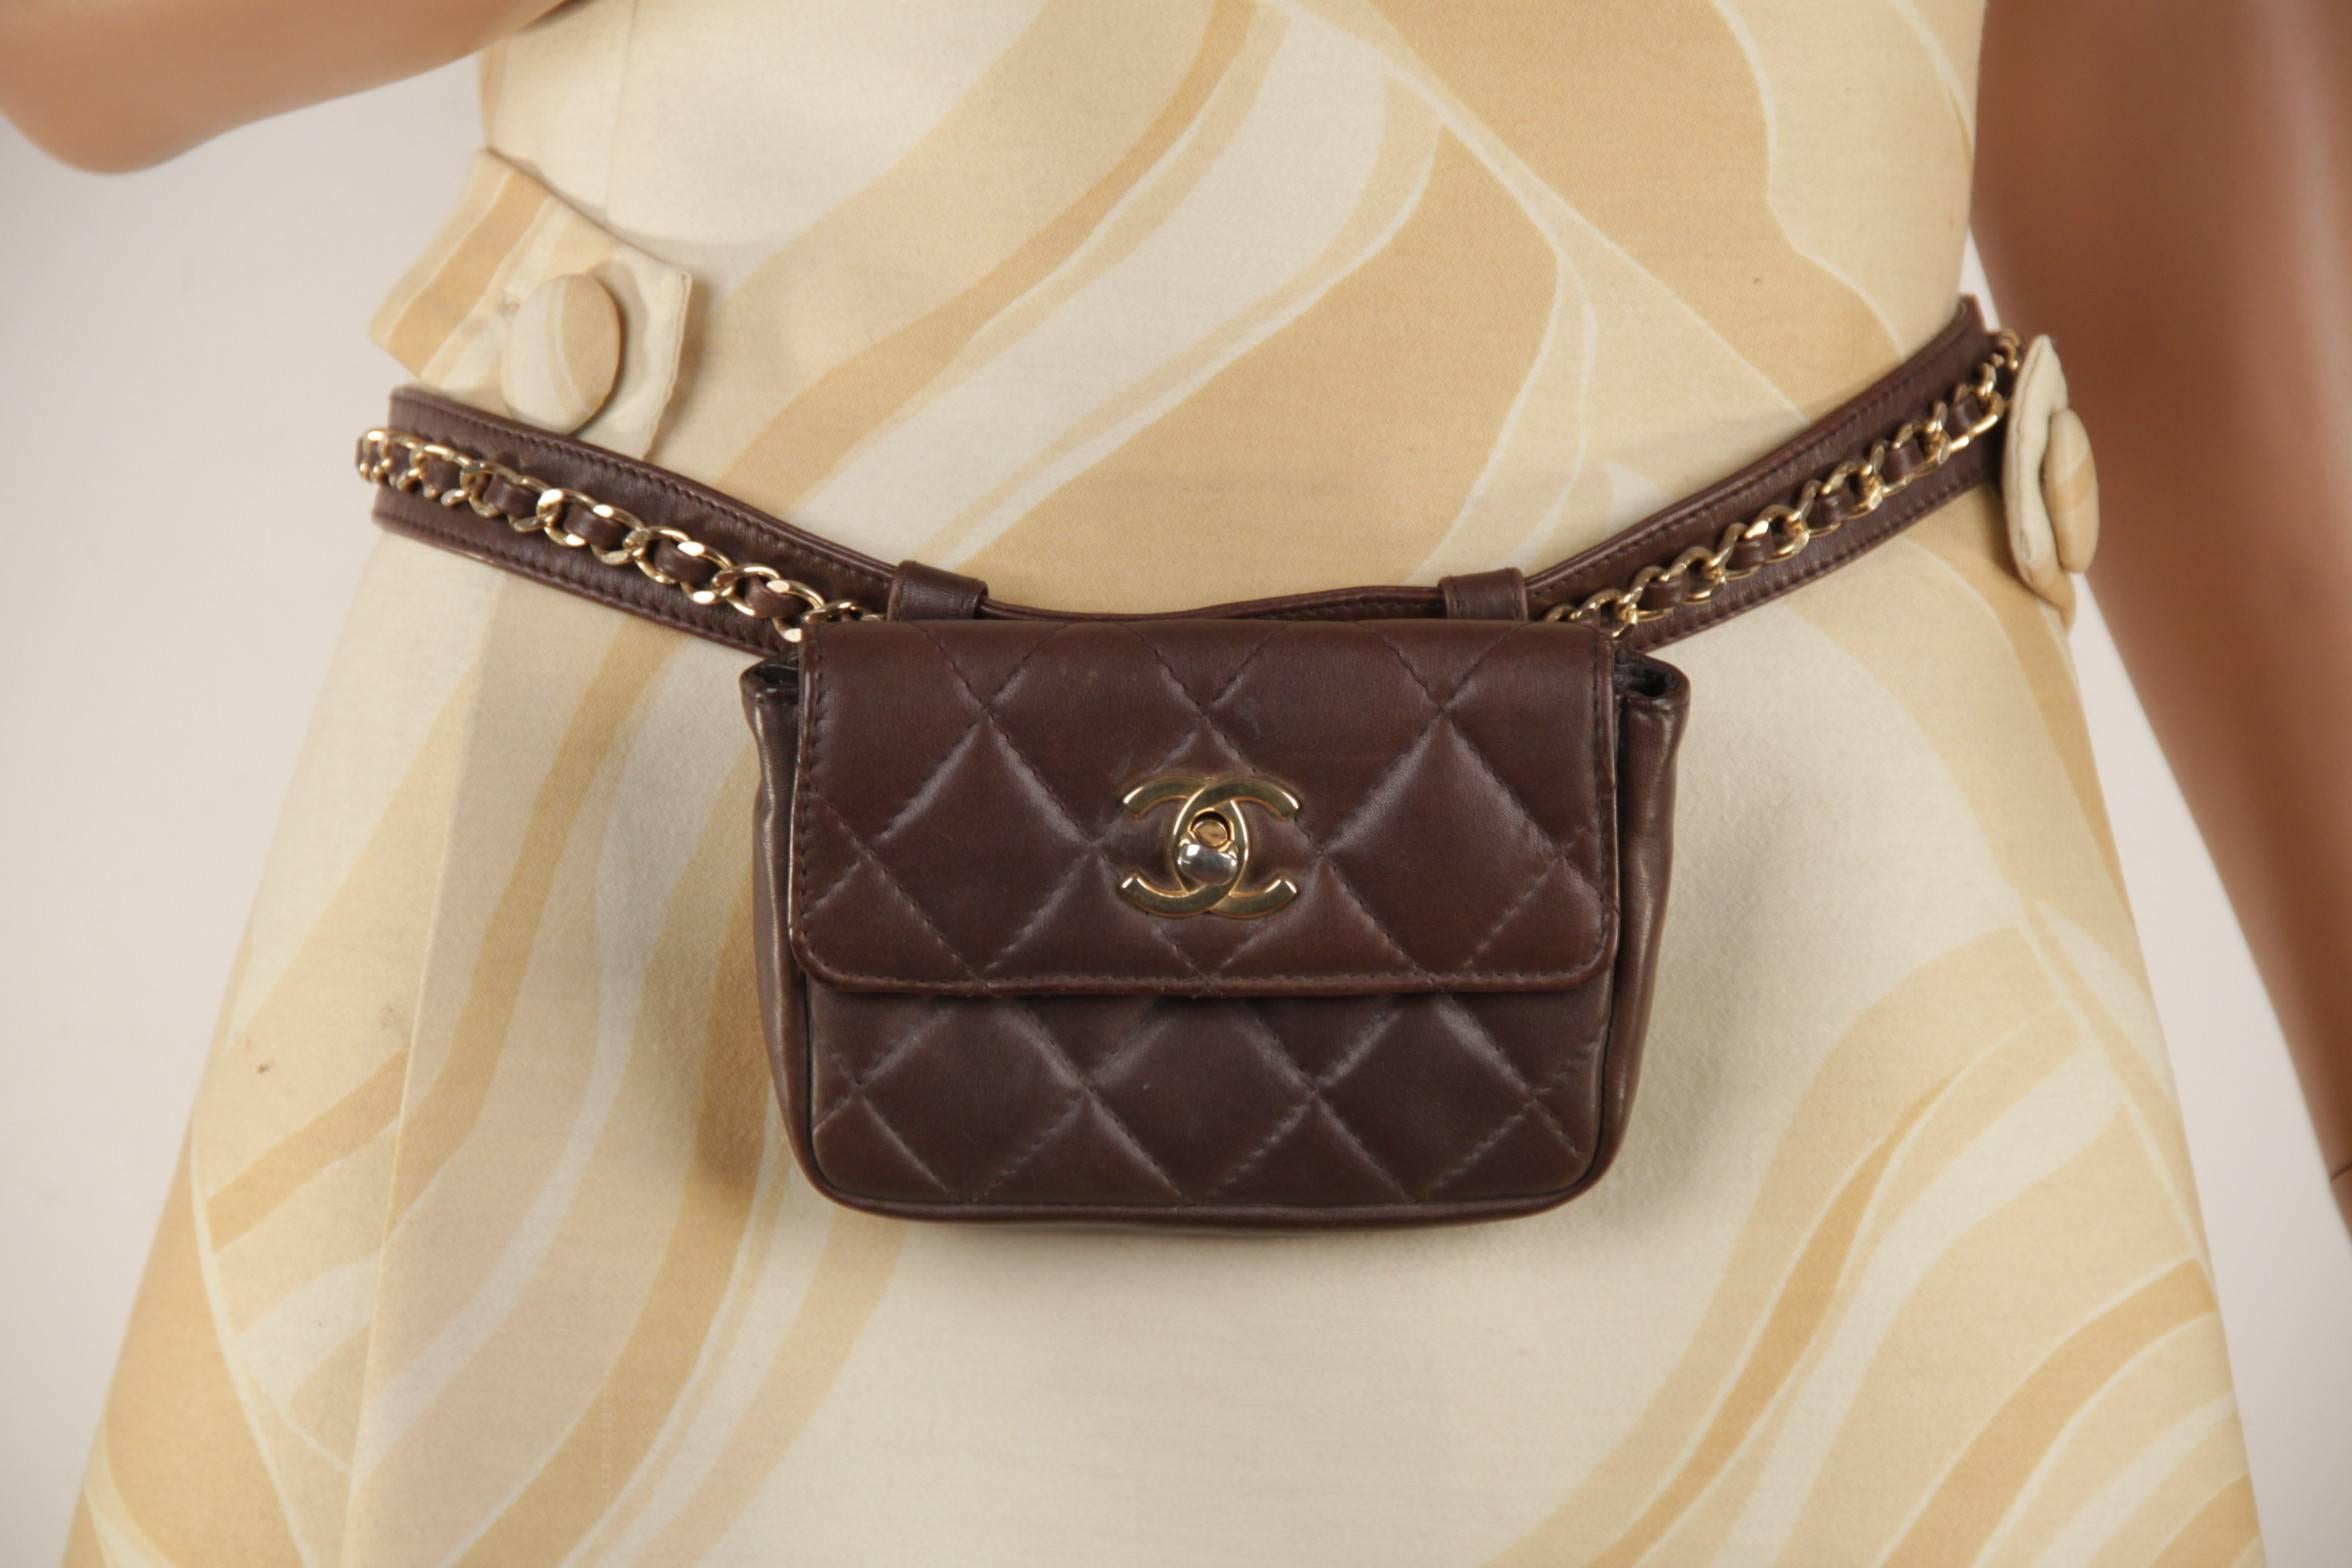 - Vintage CHANEL waist purse with chain belt

- Crafted in genuine quilted leather

- Brown color

- Leather belt with gold metal chian detailing

- Belt is removable from this bag and you can wear the belt itself.

- The removable belt is